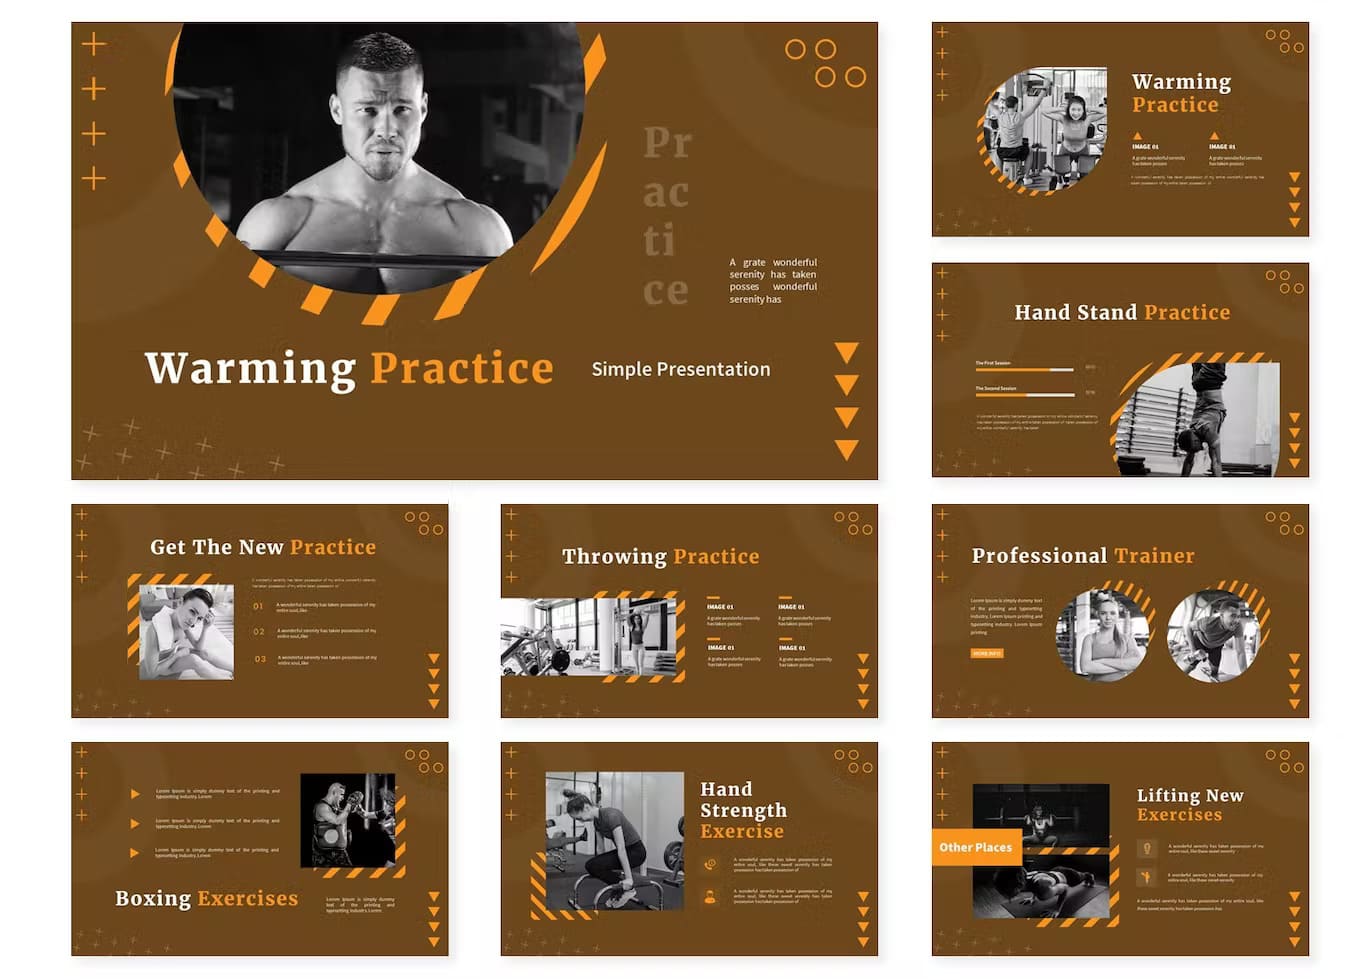 Get the new practice with warming practice.